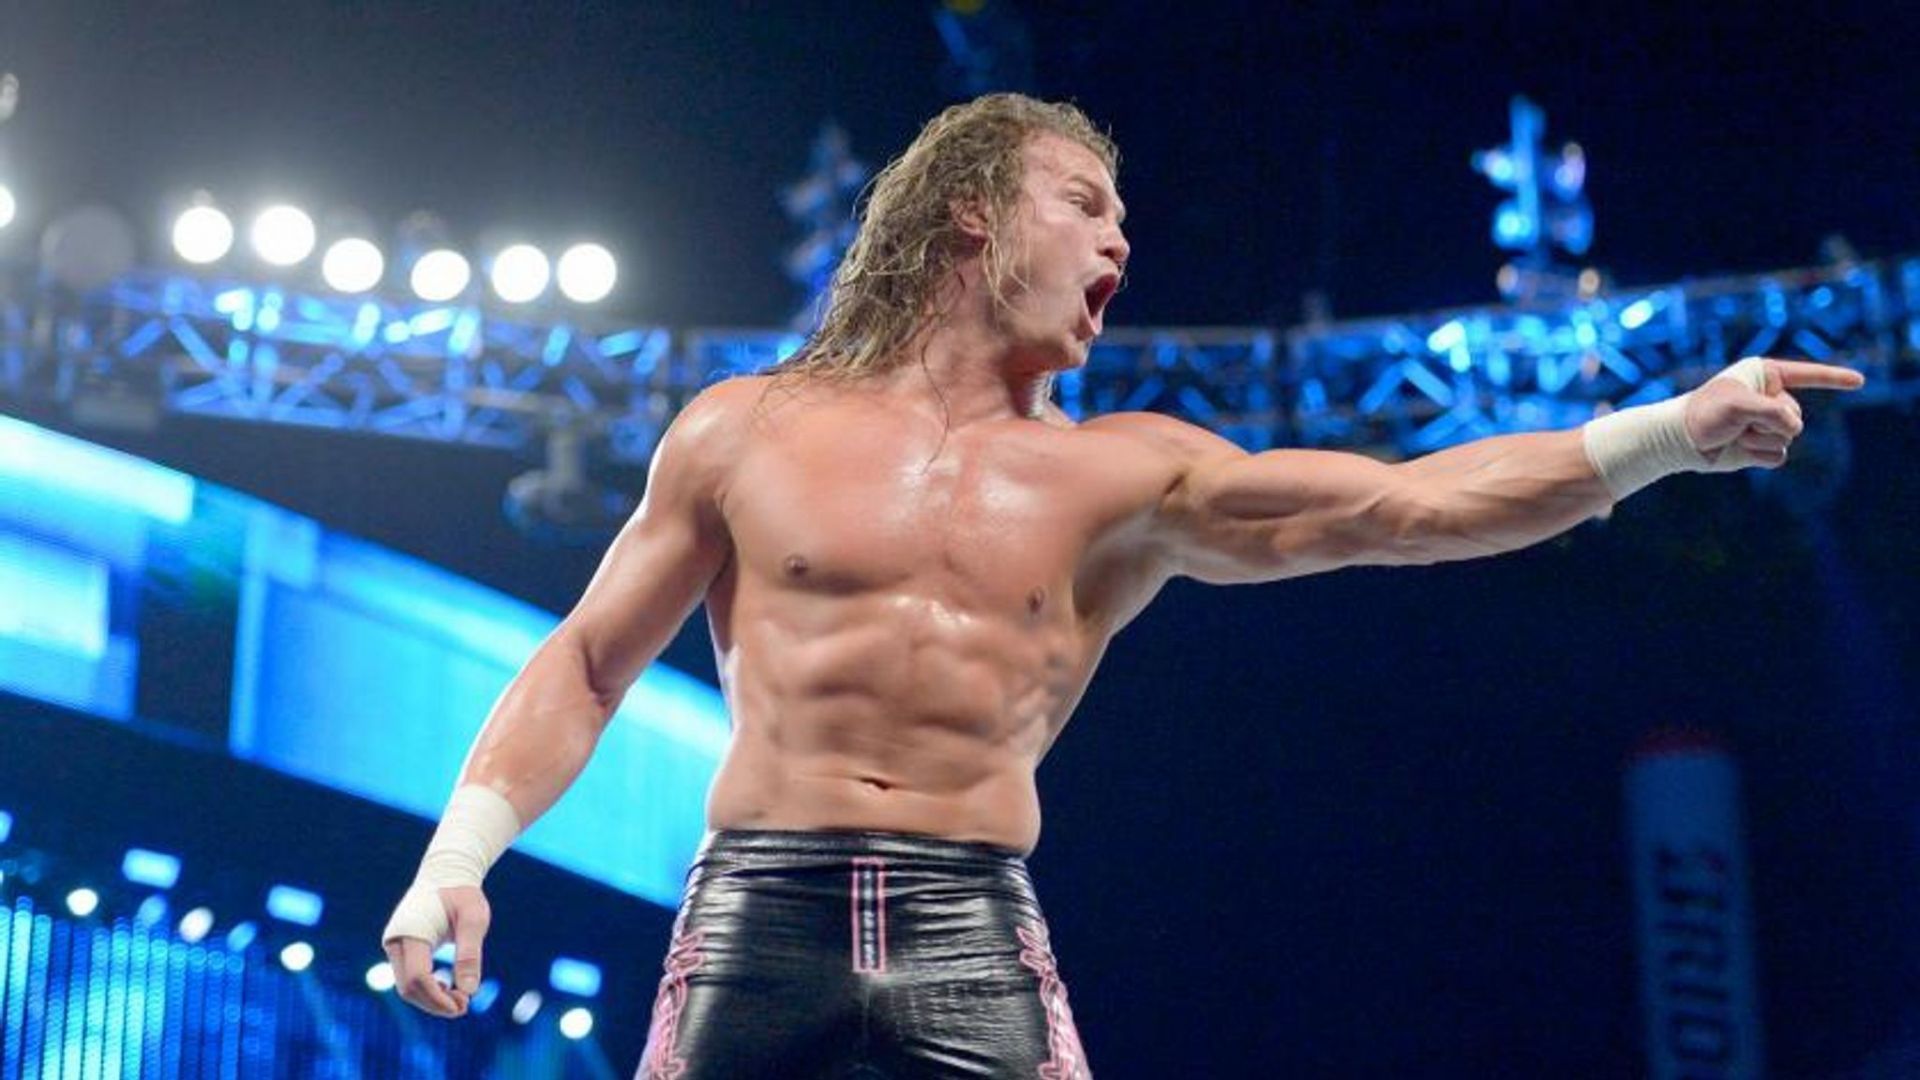 Ziggler seems to have adapted well to Welsh culture